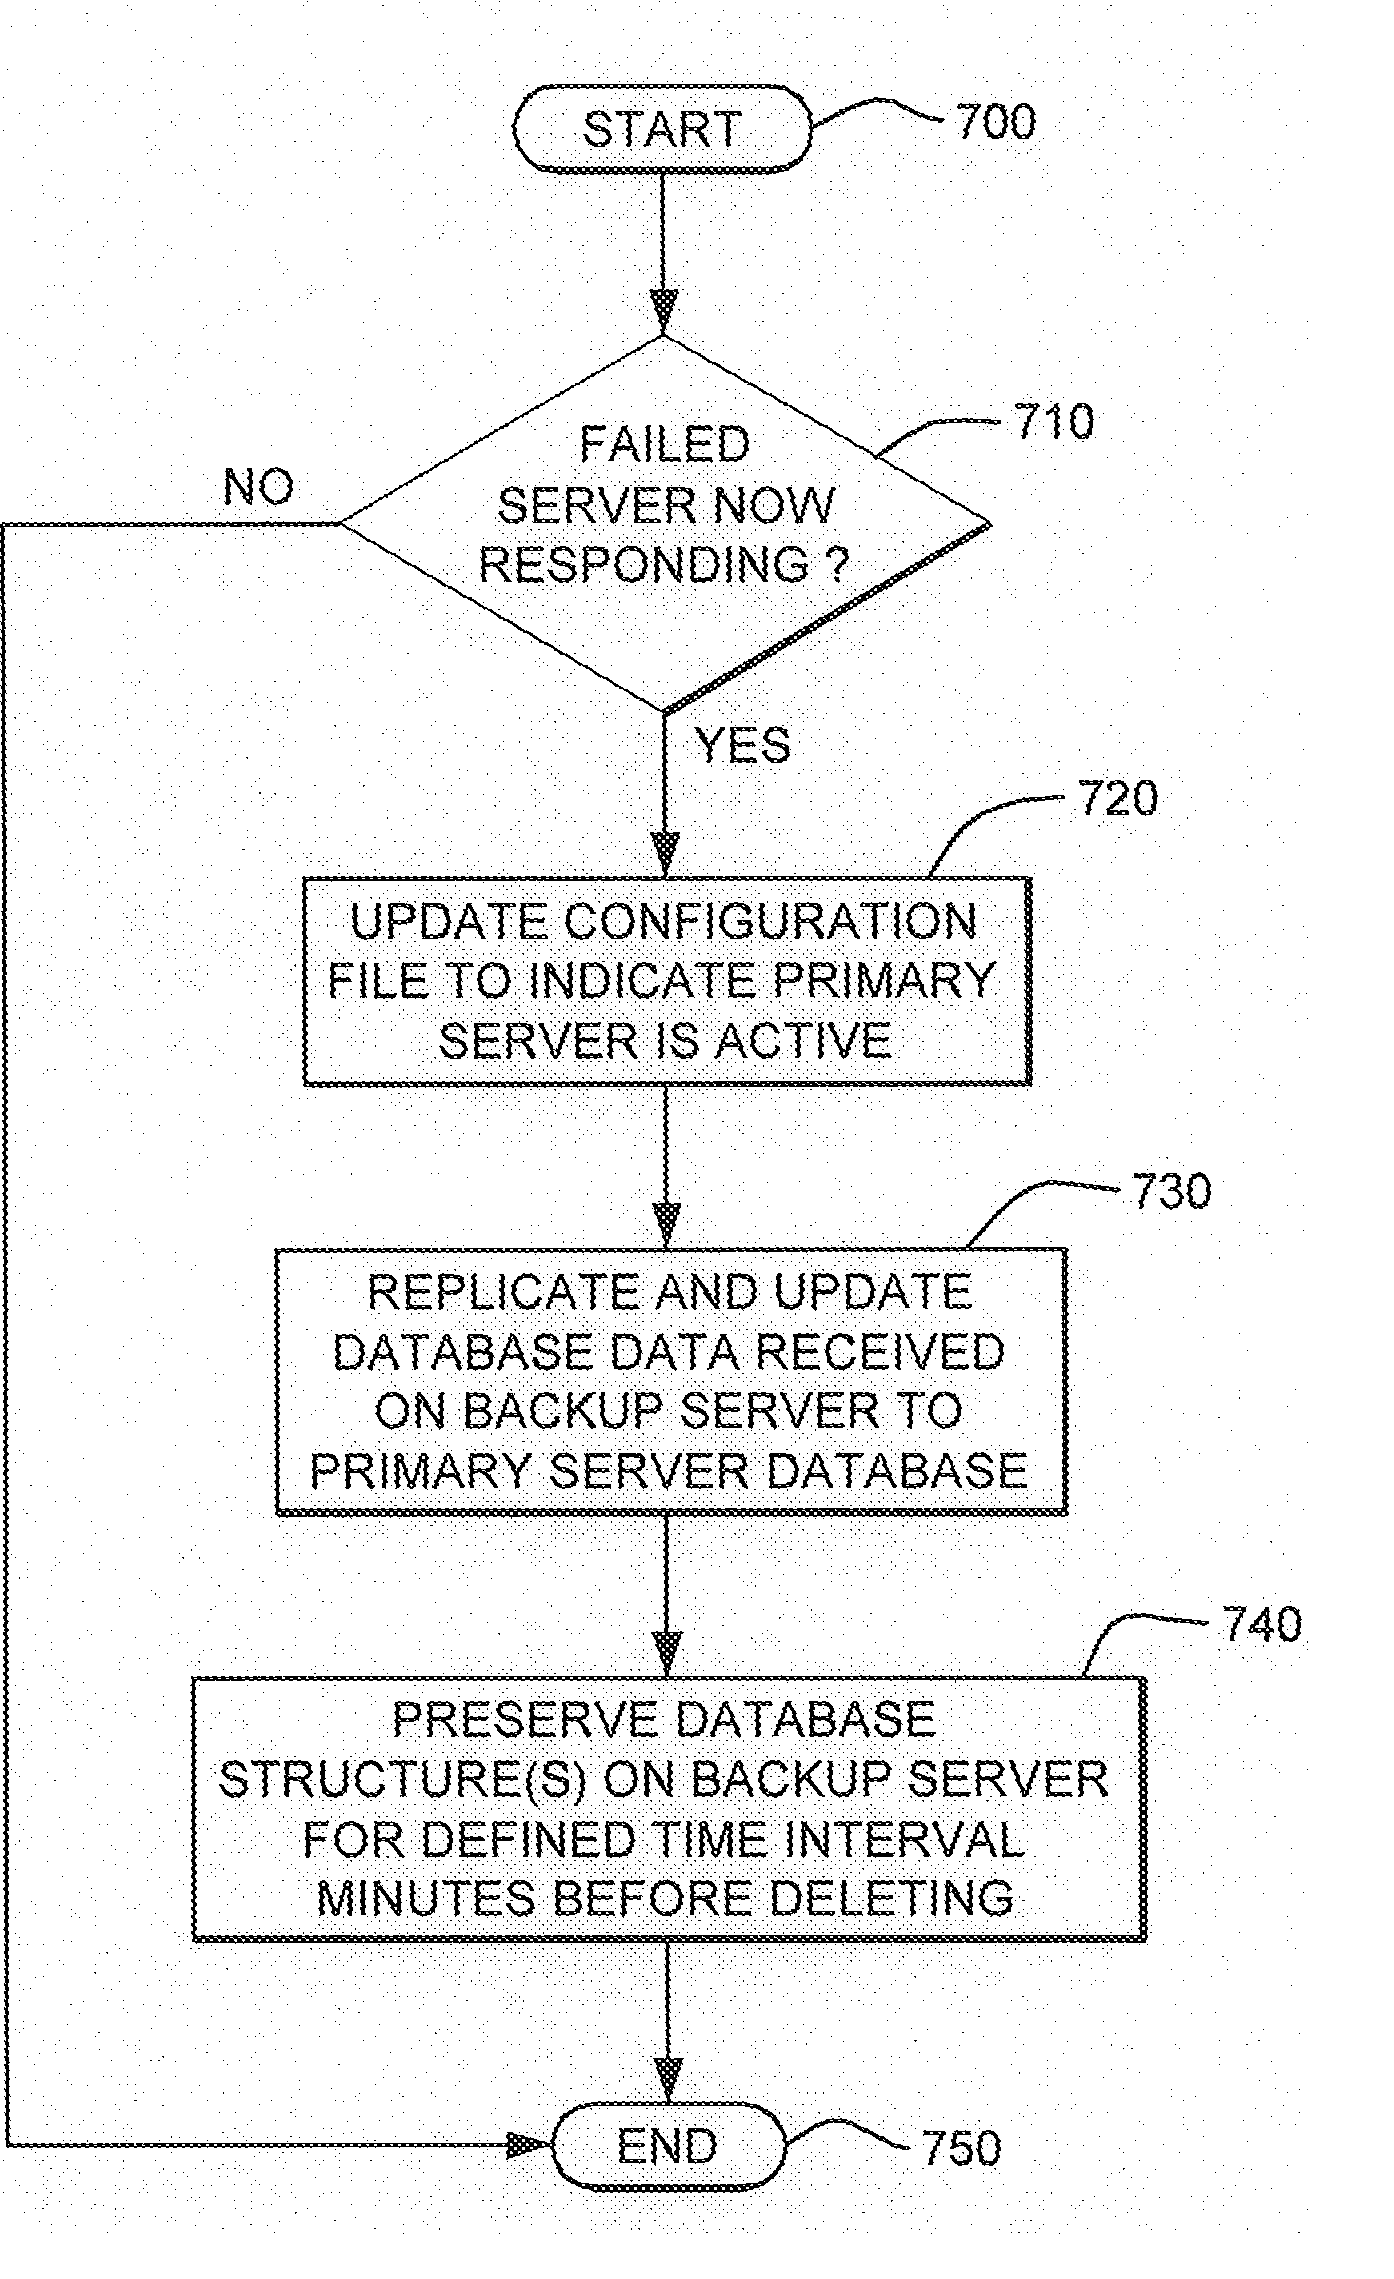 Transitioning of Database Service Responsibility Responsive to Server Failure in a Partially Clustered Computing Environment